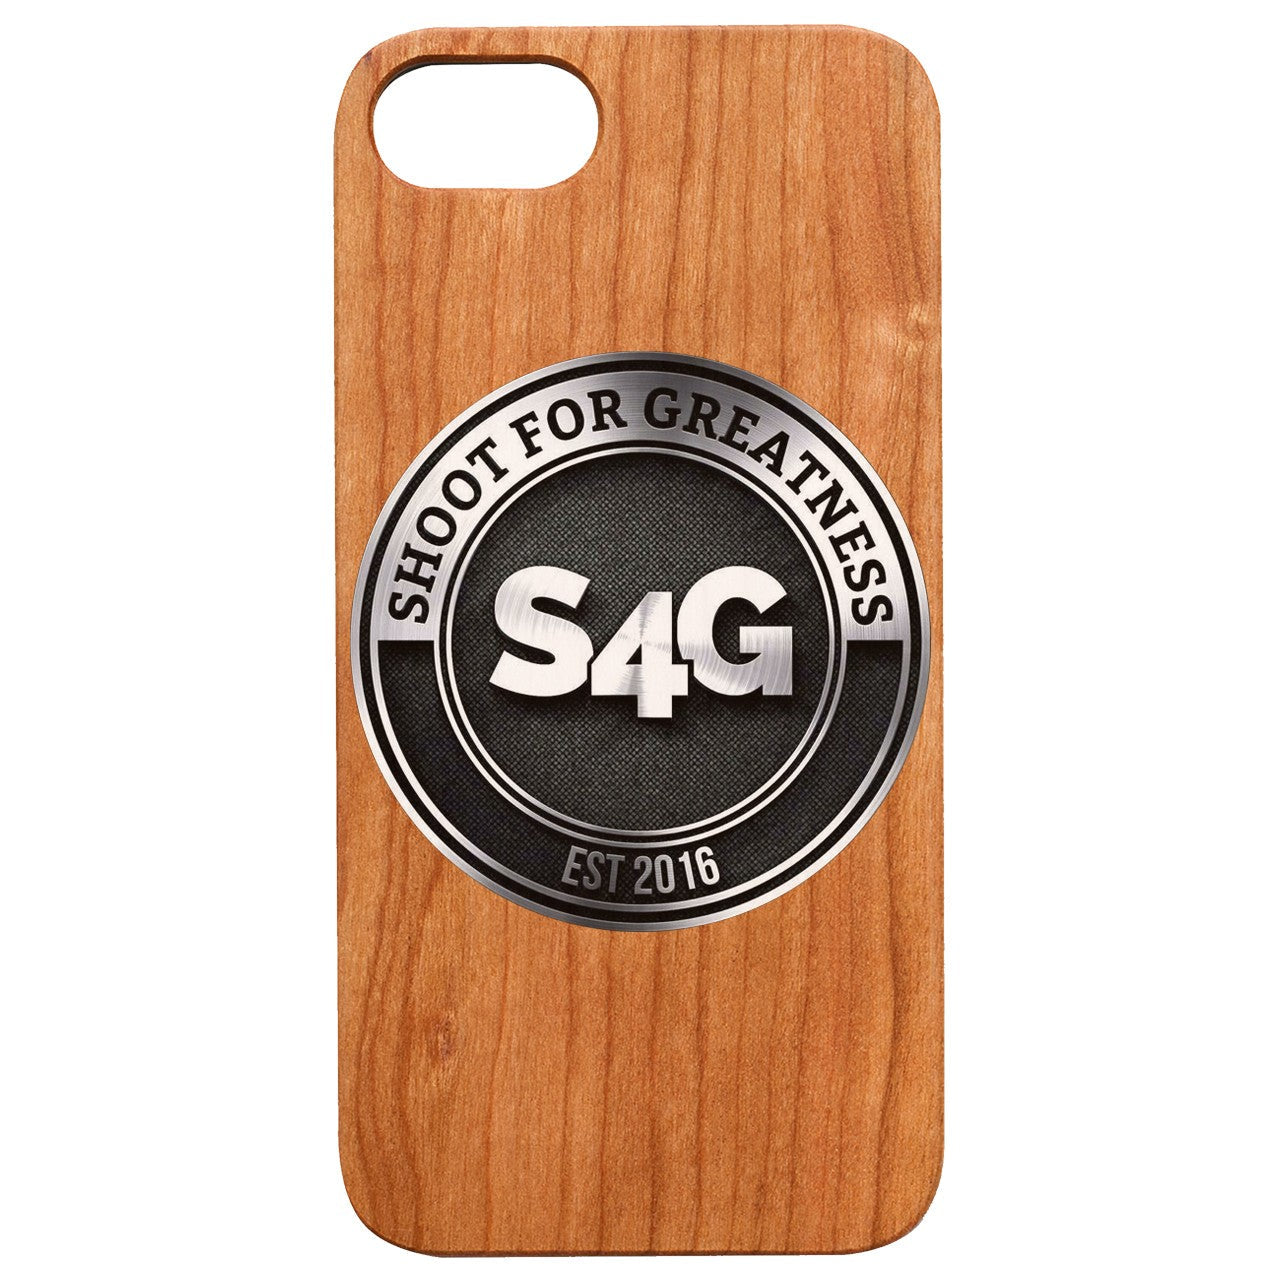  Shoot4Greatness - Engraved - Wooden Phone Case - IPhone 13 Models